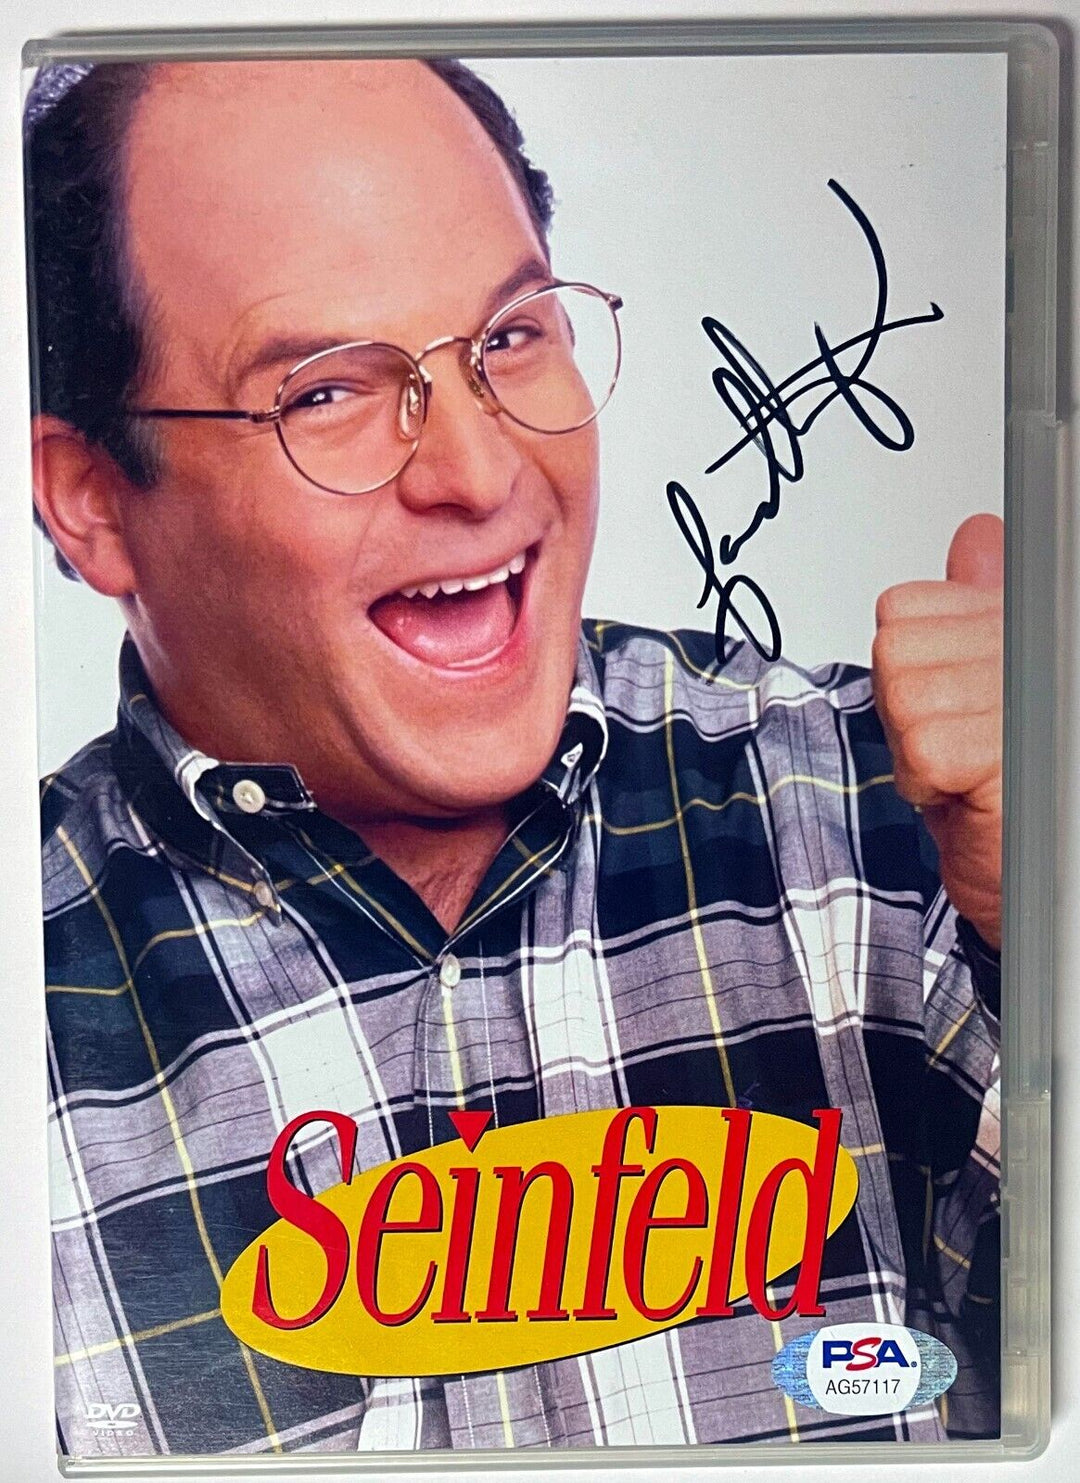 Jason Alexander signed 2010 Seinfeld DVD Cover/DVD George Costanza PSA #AG57117 Image 1